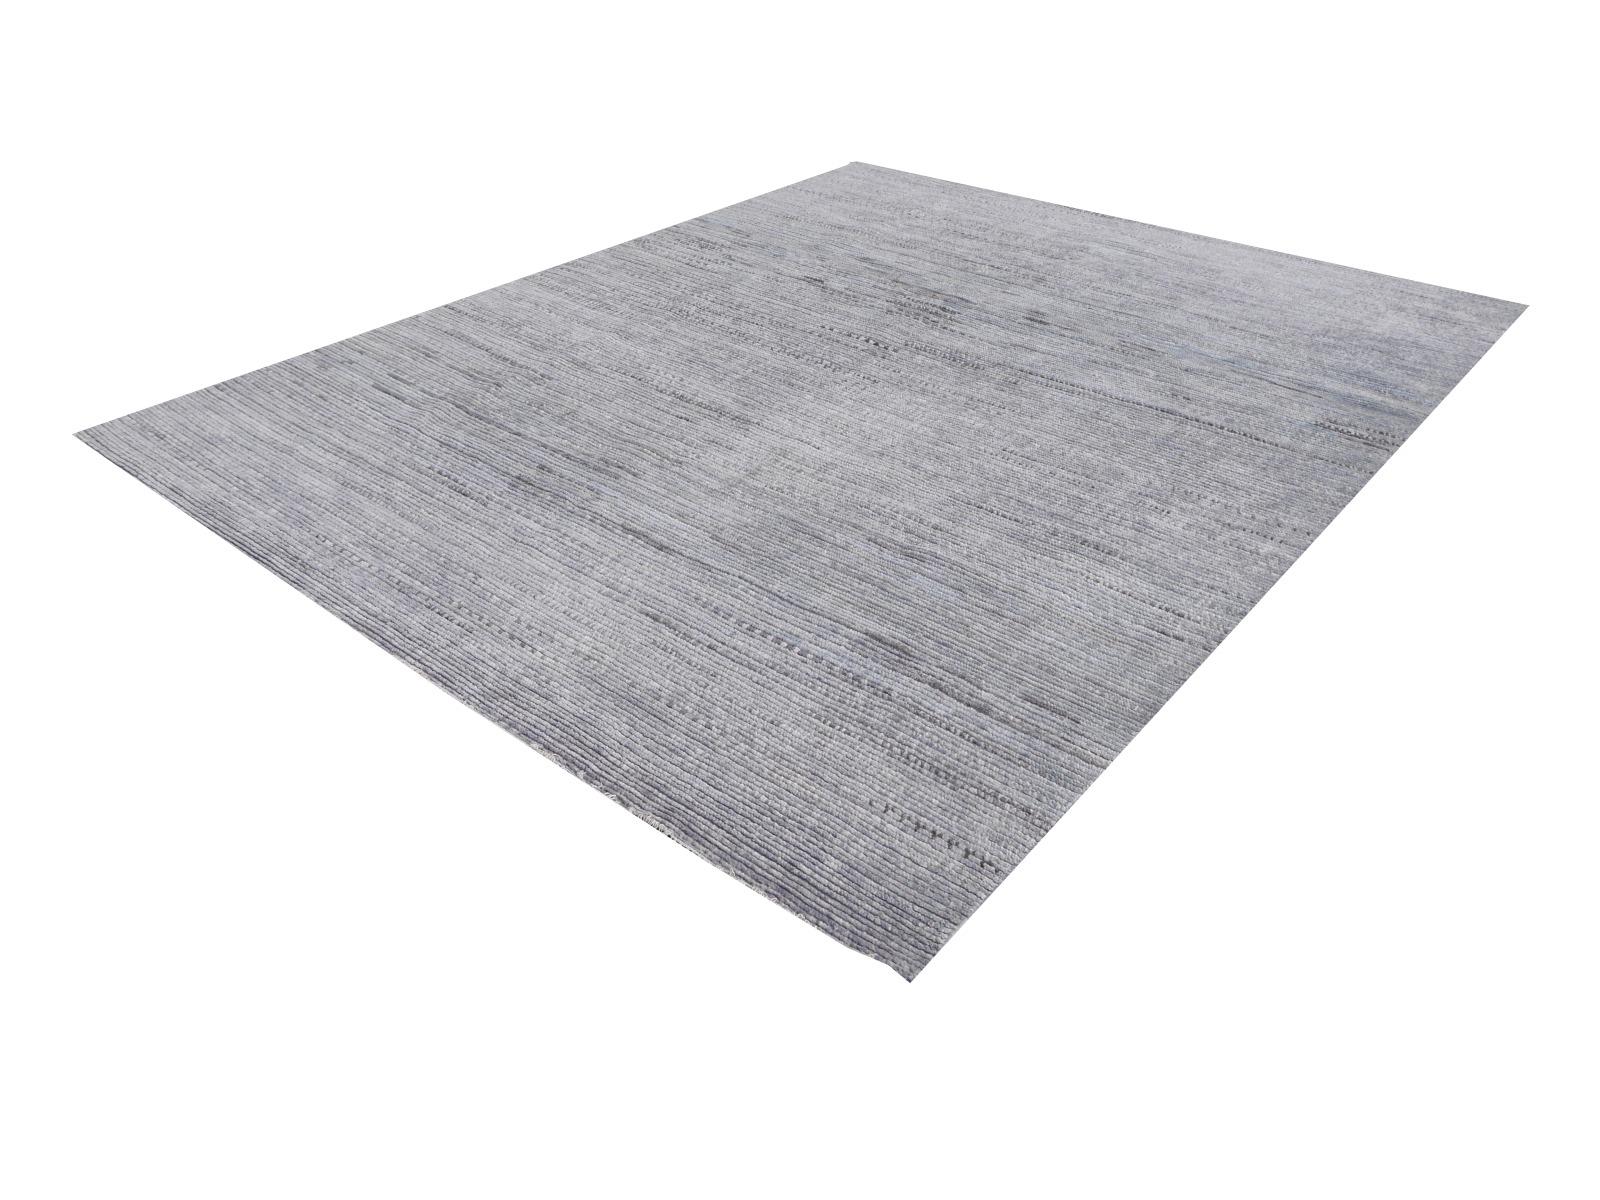 A beautiful Zagora rug 8 x 10 ft. This modern rug is hand knotted and has a wool pile in trending interior design shades. On a gray and blue field, the design in style of traditional Beni Ourain Berber rugs shows small stripe elements standing next